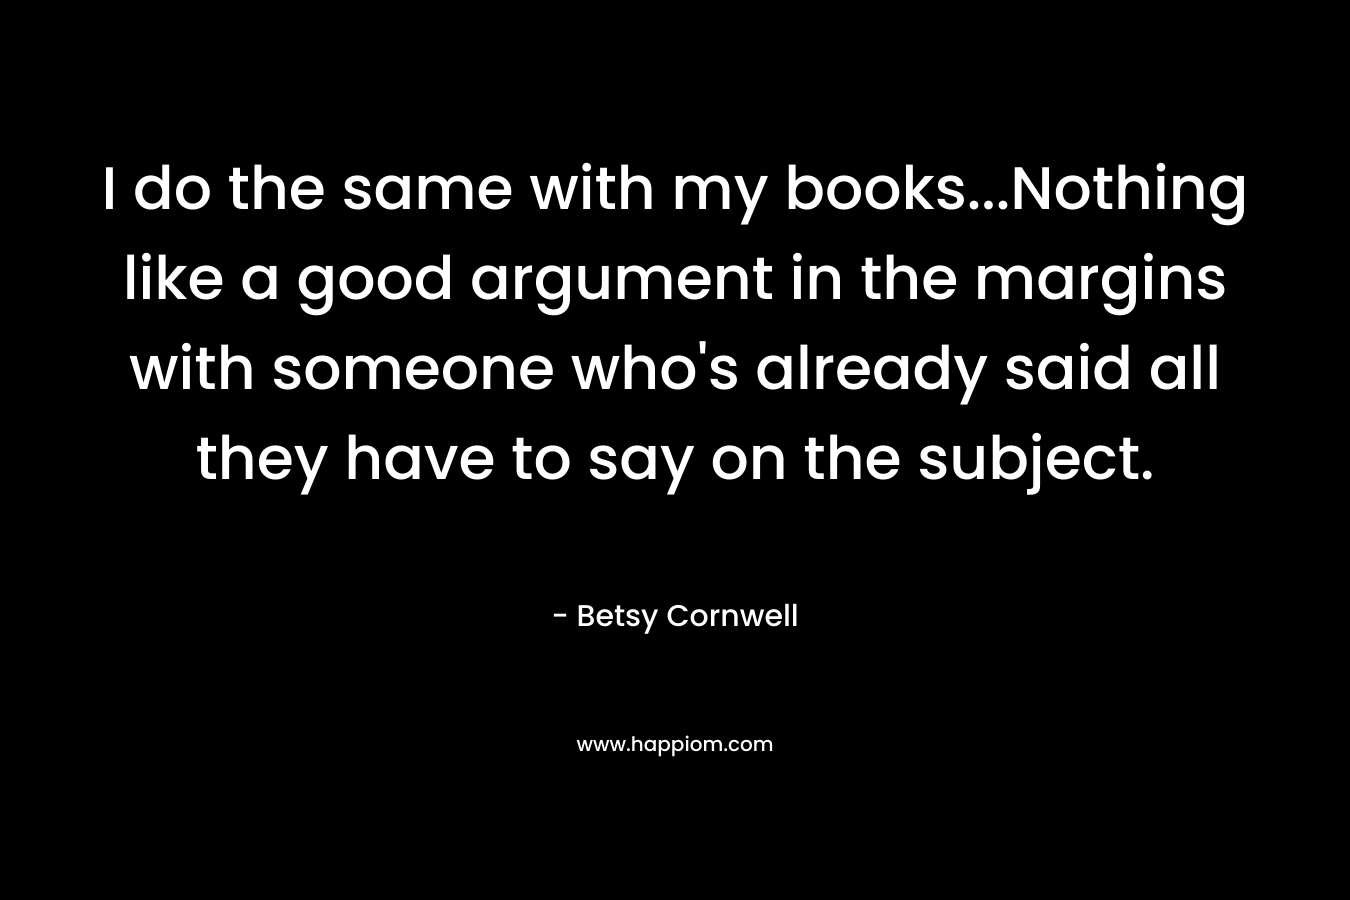 I do the same with my books...Nothing like a good argument in the margins with someone who's already said all they have to say on the subject.